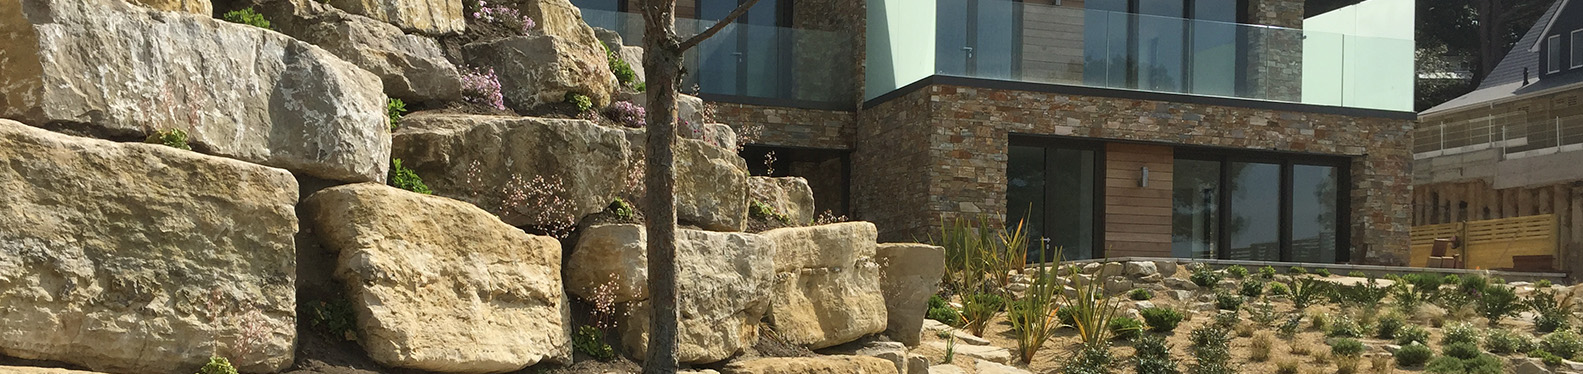 Suttle Purbeck Stone in Landscaping